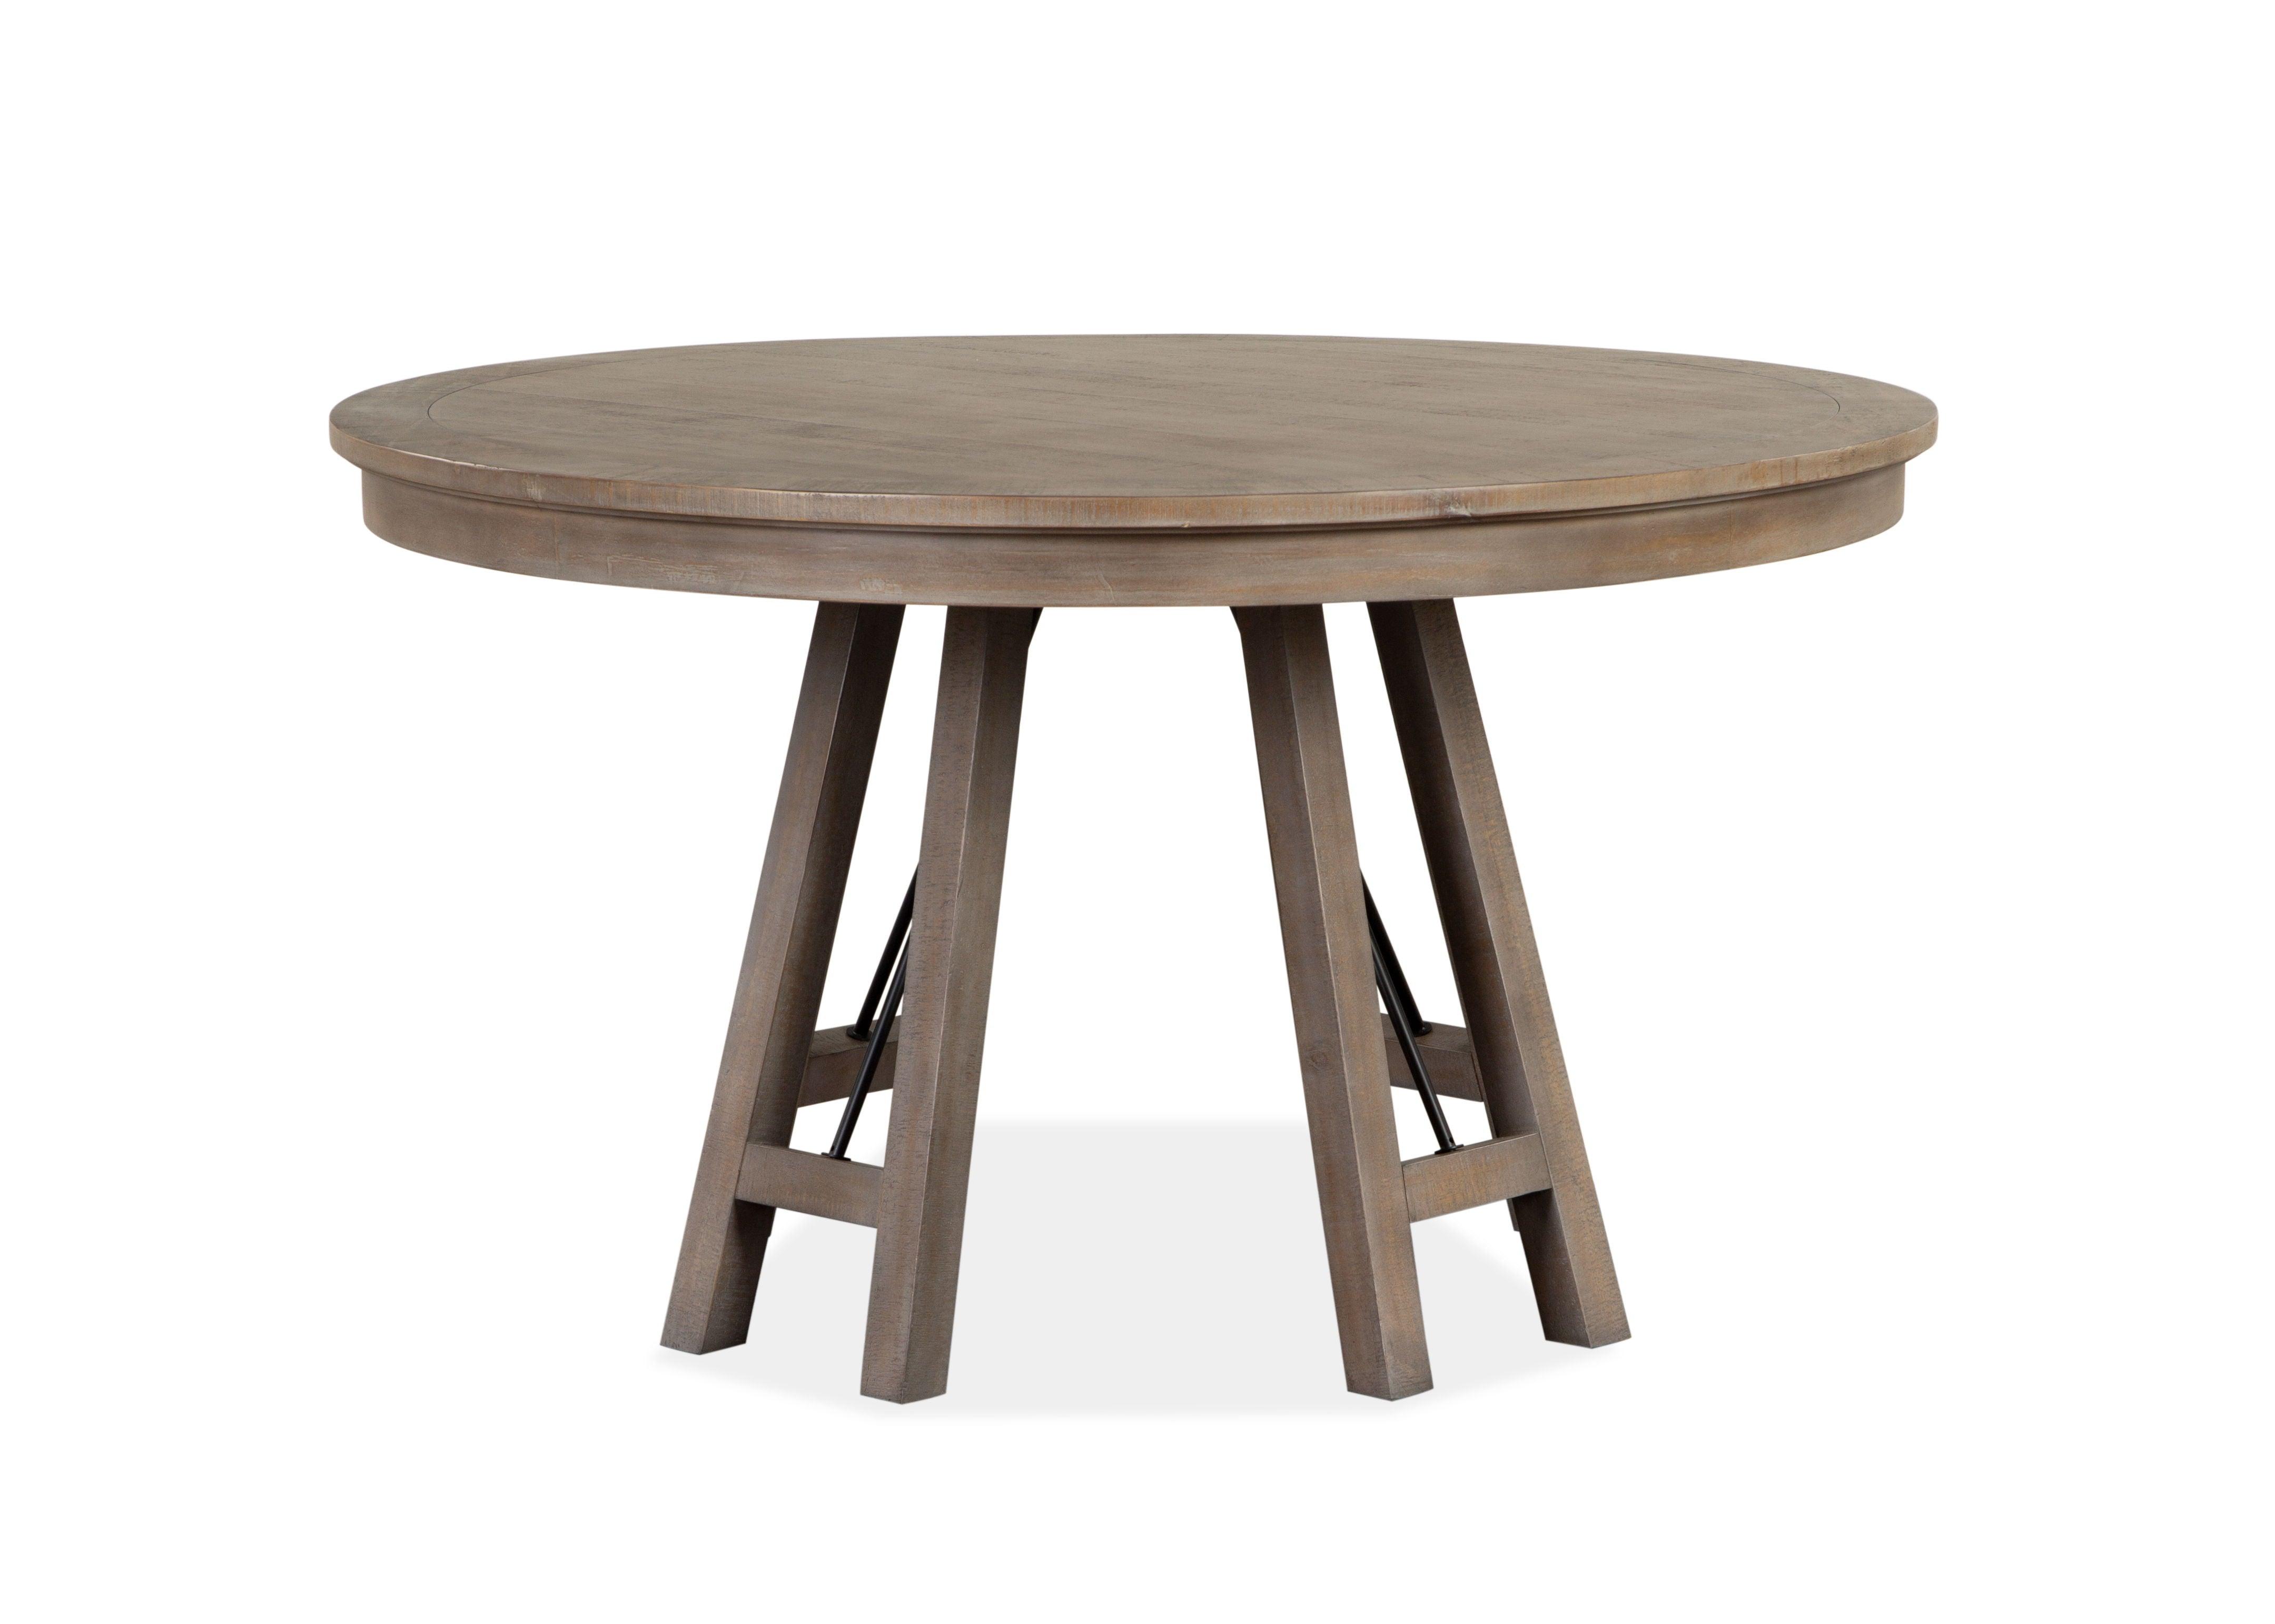 Magnussen Furniture - Paxton Place - Round Dining Table - Dovetail Grey - 5th Avenue Furniture